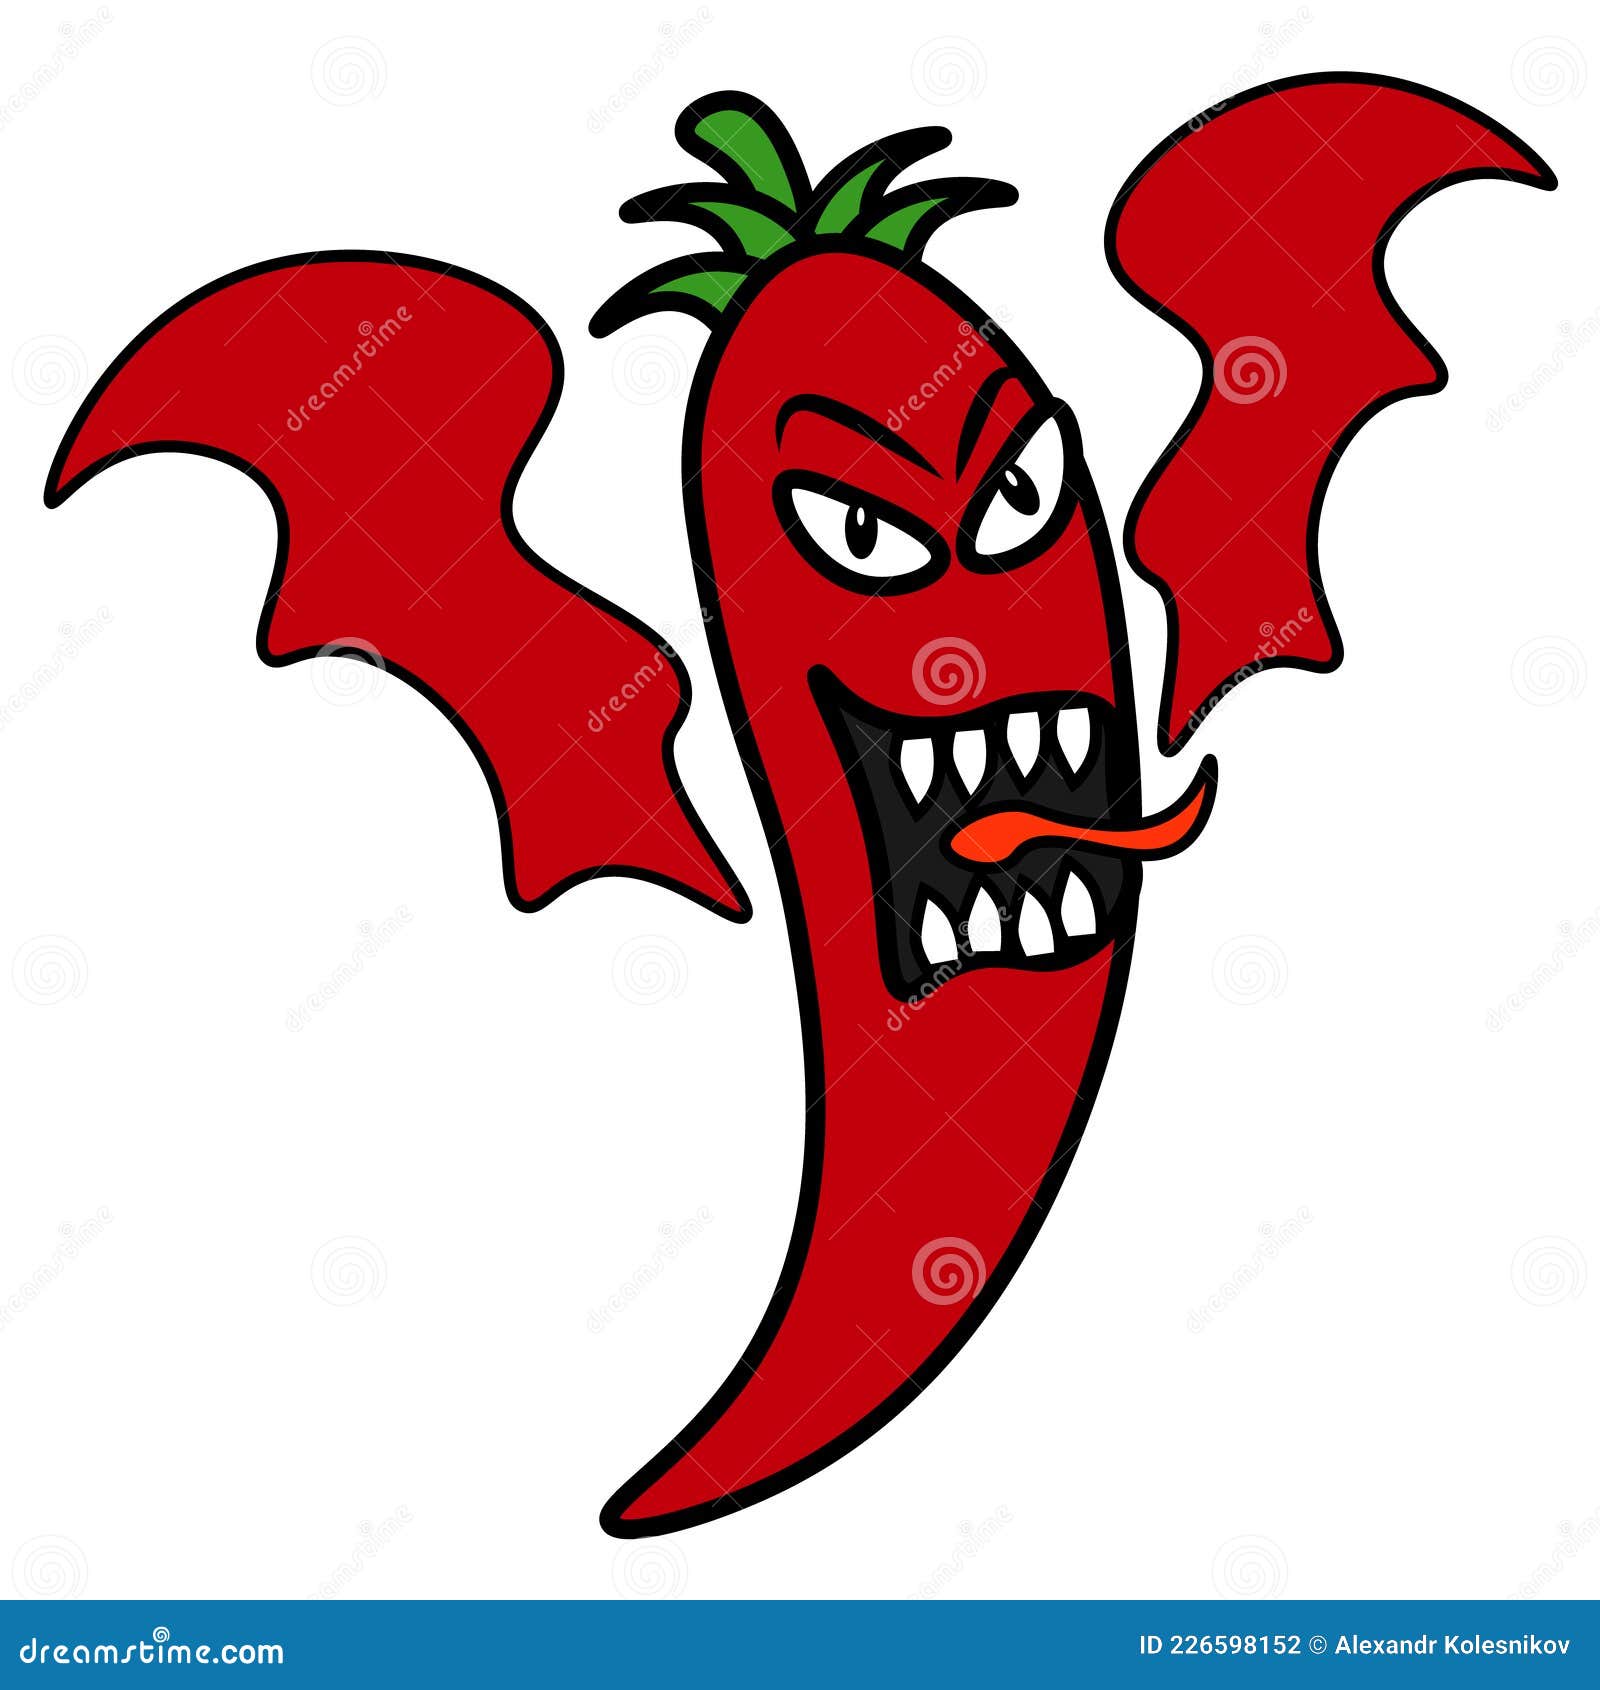 Funny and Scary Hot Pepper. Vector Illustration on the Theme of the Cartoon  Fruit Stock Vector - Illustration of fresh, jalapeno: 226598152